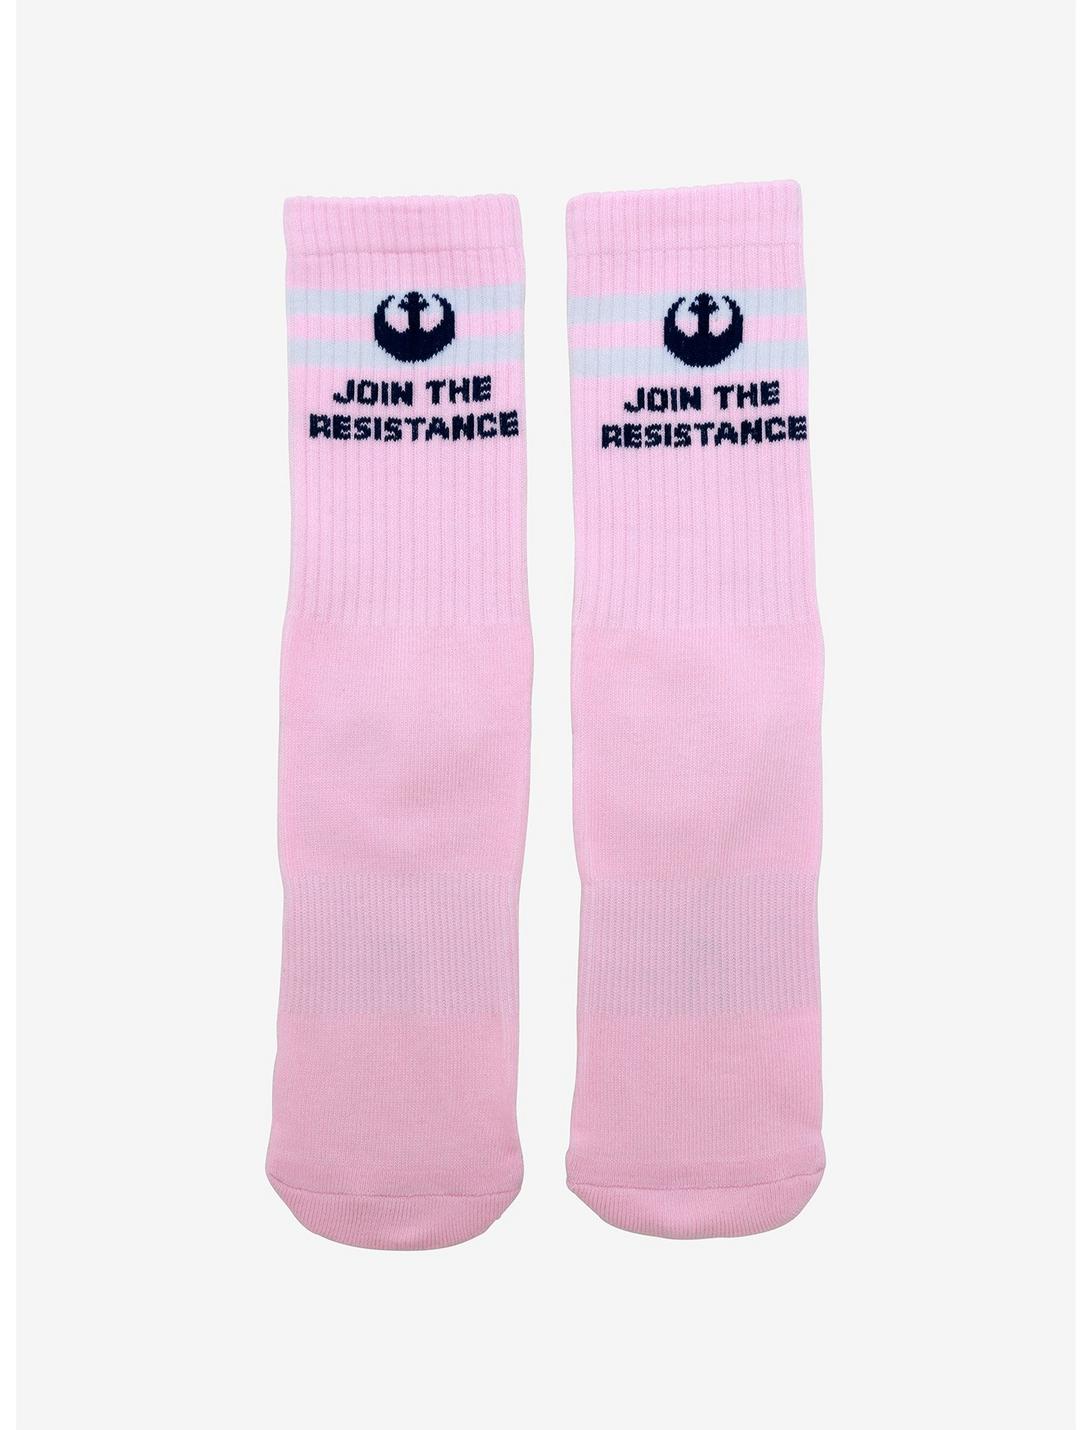 Star Wars Join The Resistance Pink & White Crew Socks, , hi-res